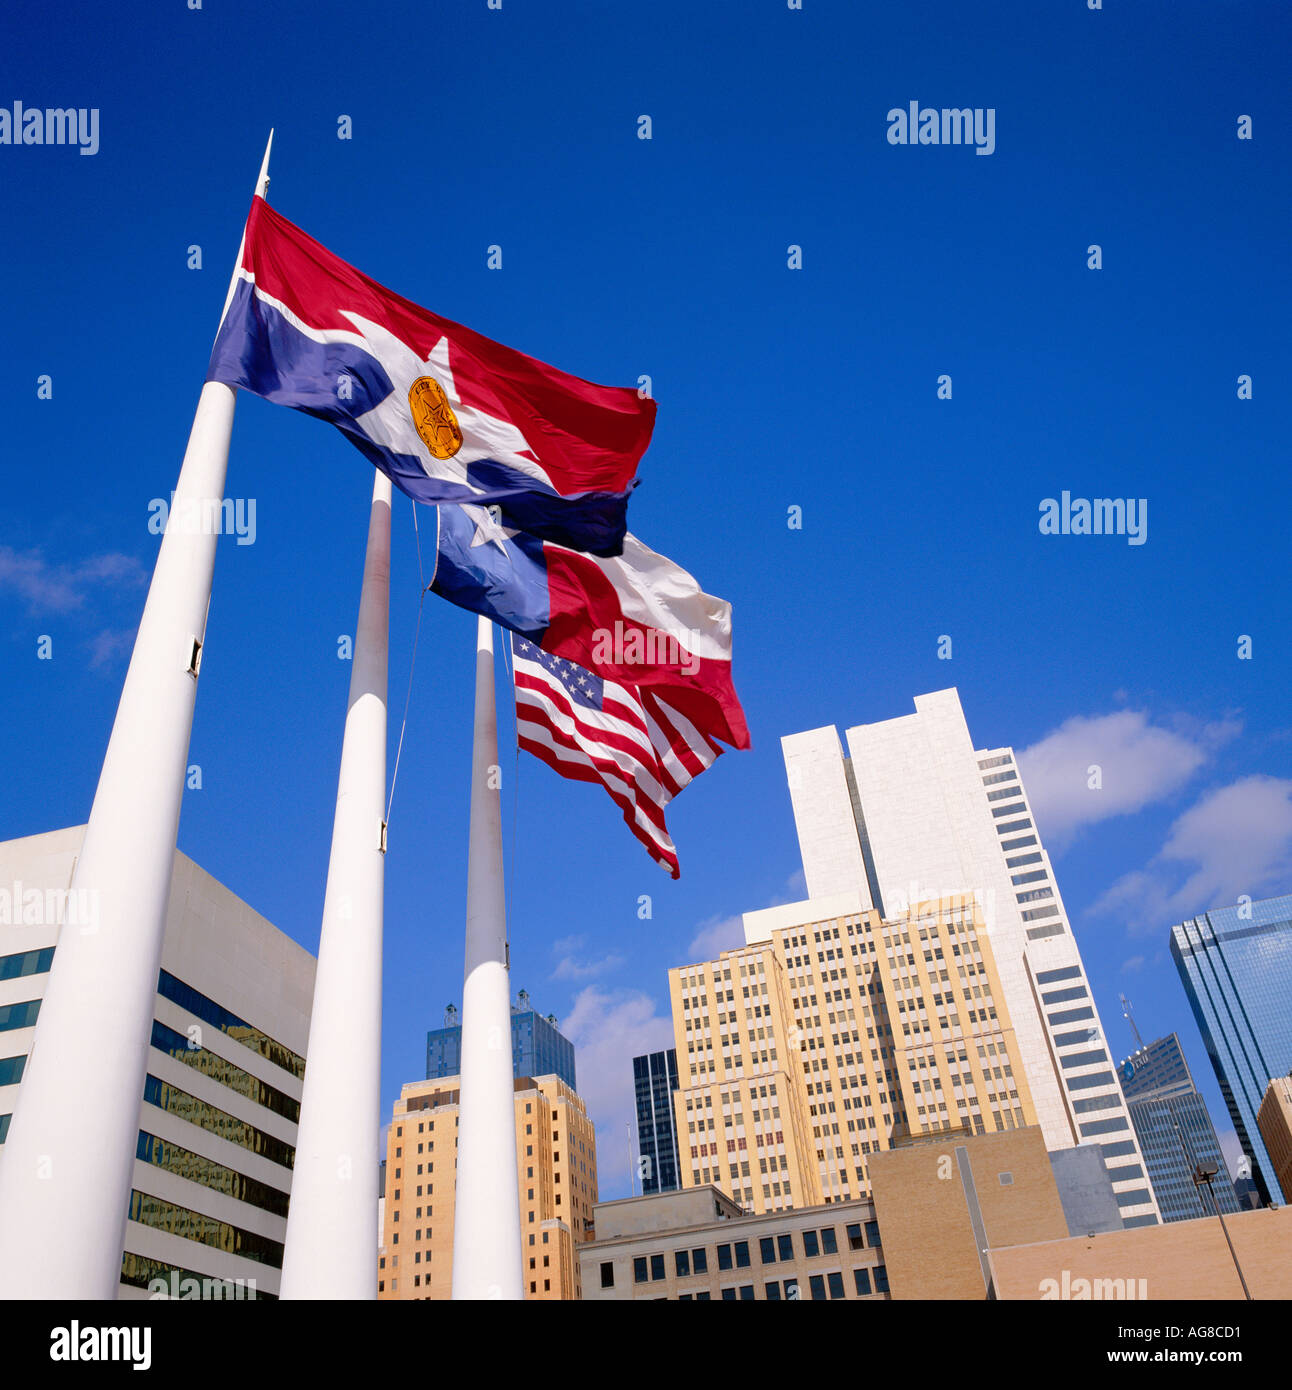 Flags of State of Texas USA Stars and Stripes and City of Dallas flying from flag staff Dallas USA City Hall Plaza Stock Photo